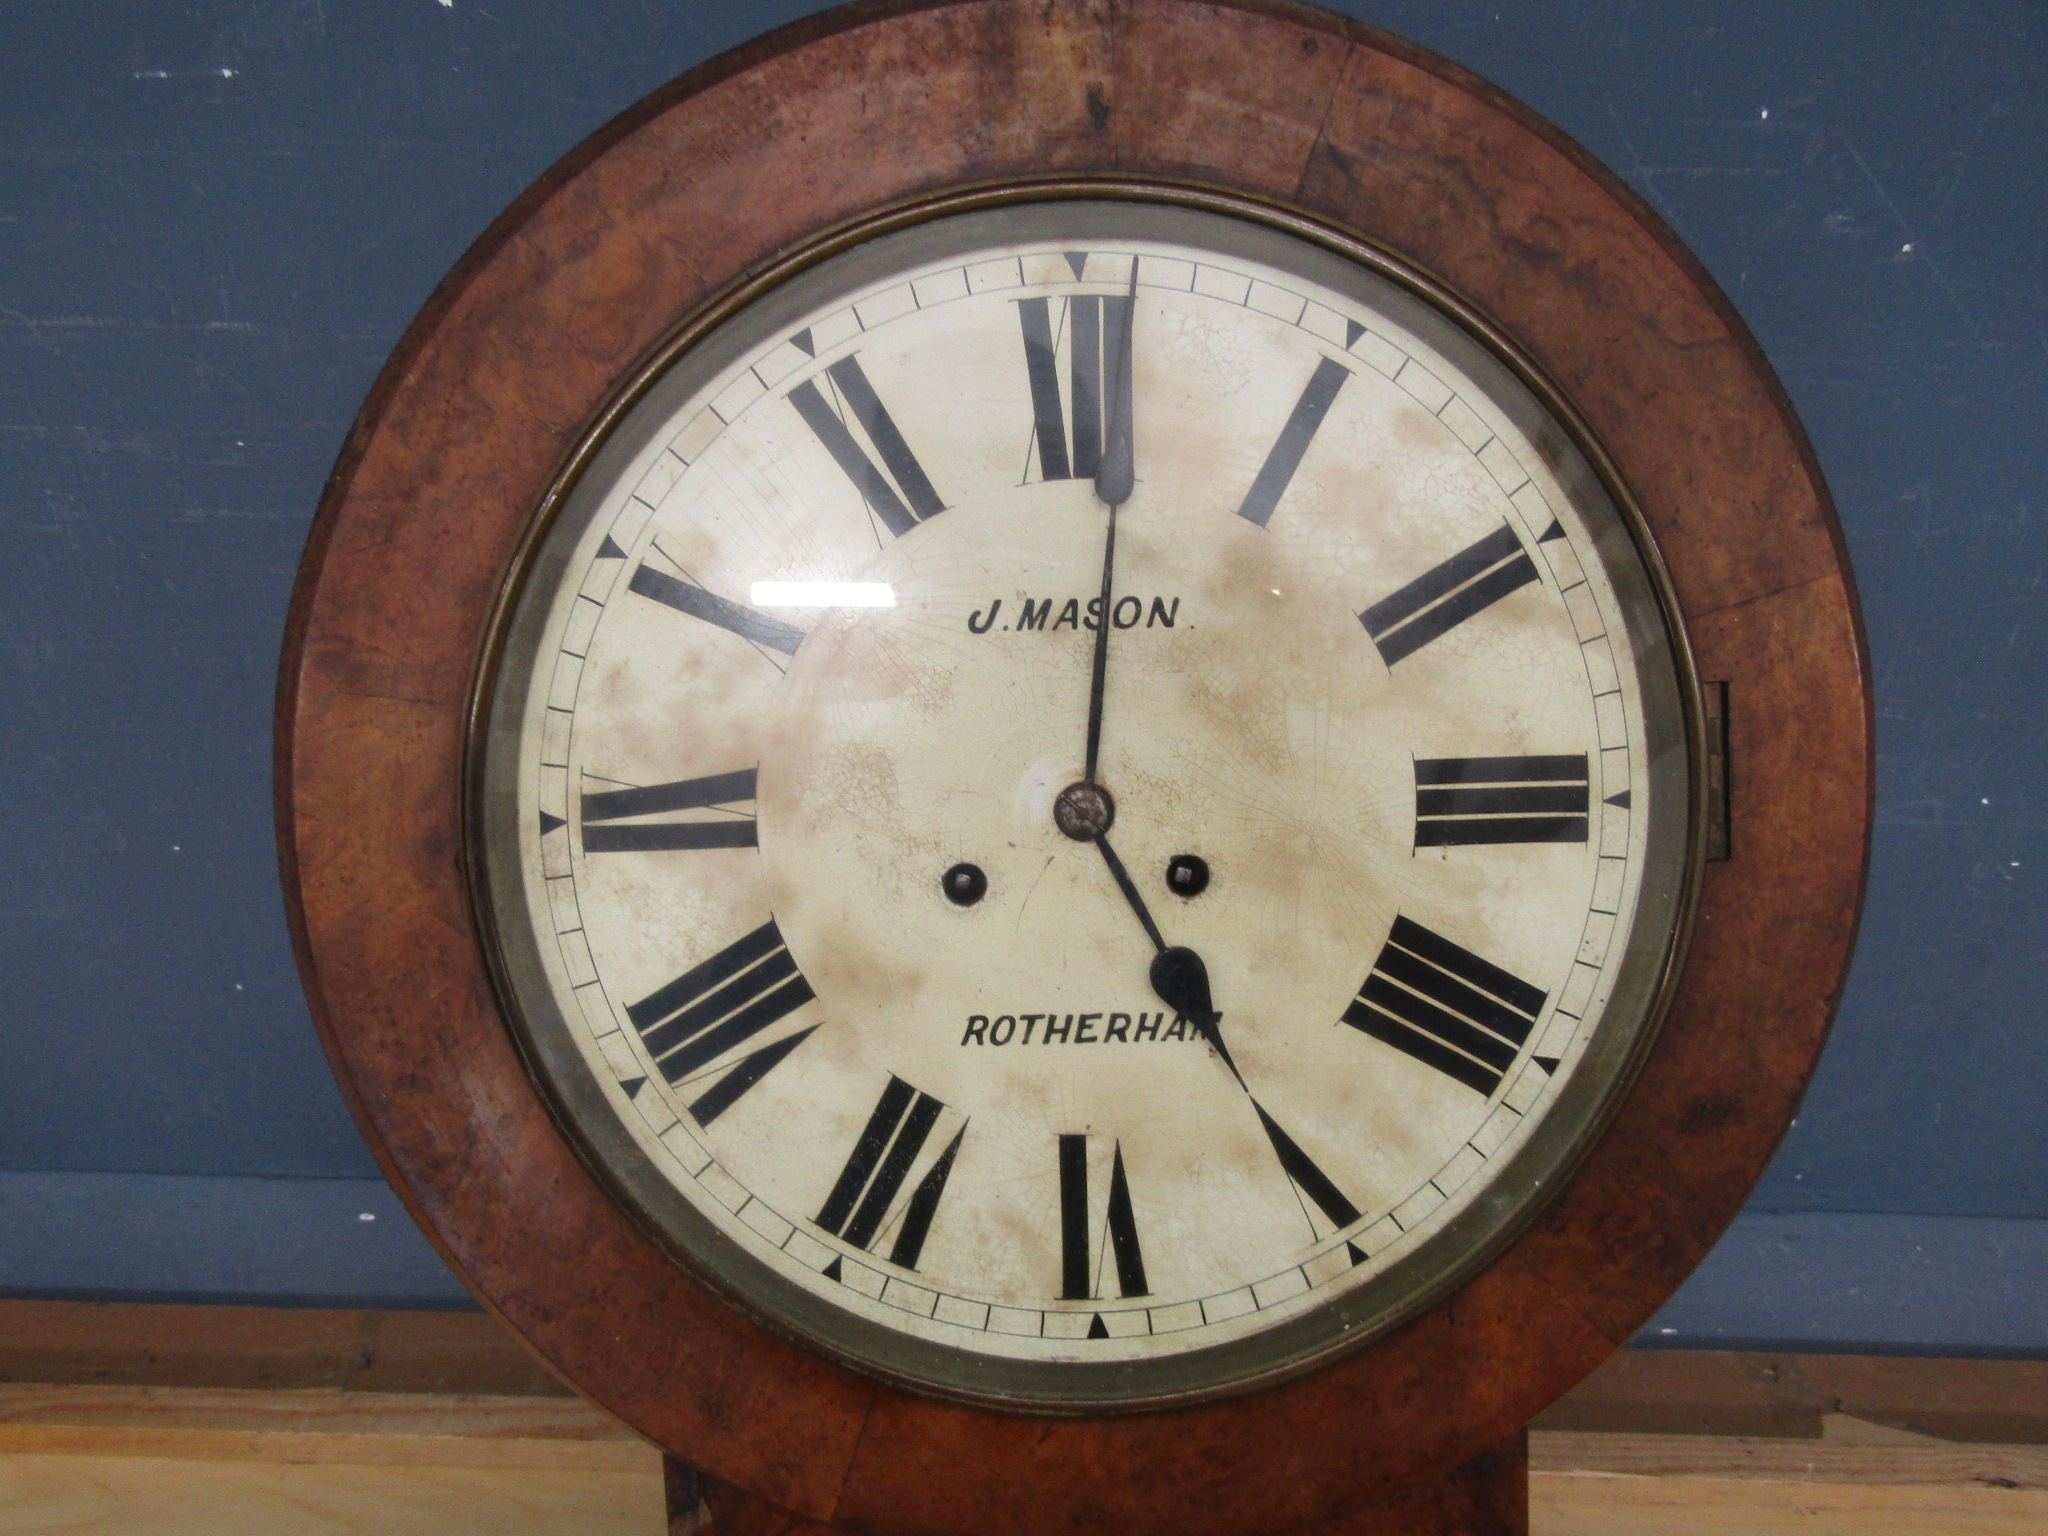 1860's J. Mason, Rotherham twin fusee drop dial striking wall clock in walnut case (needs some - Image 2 of 7